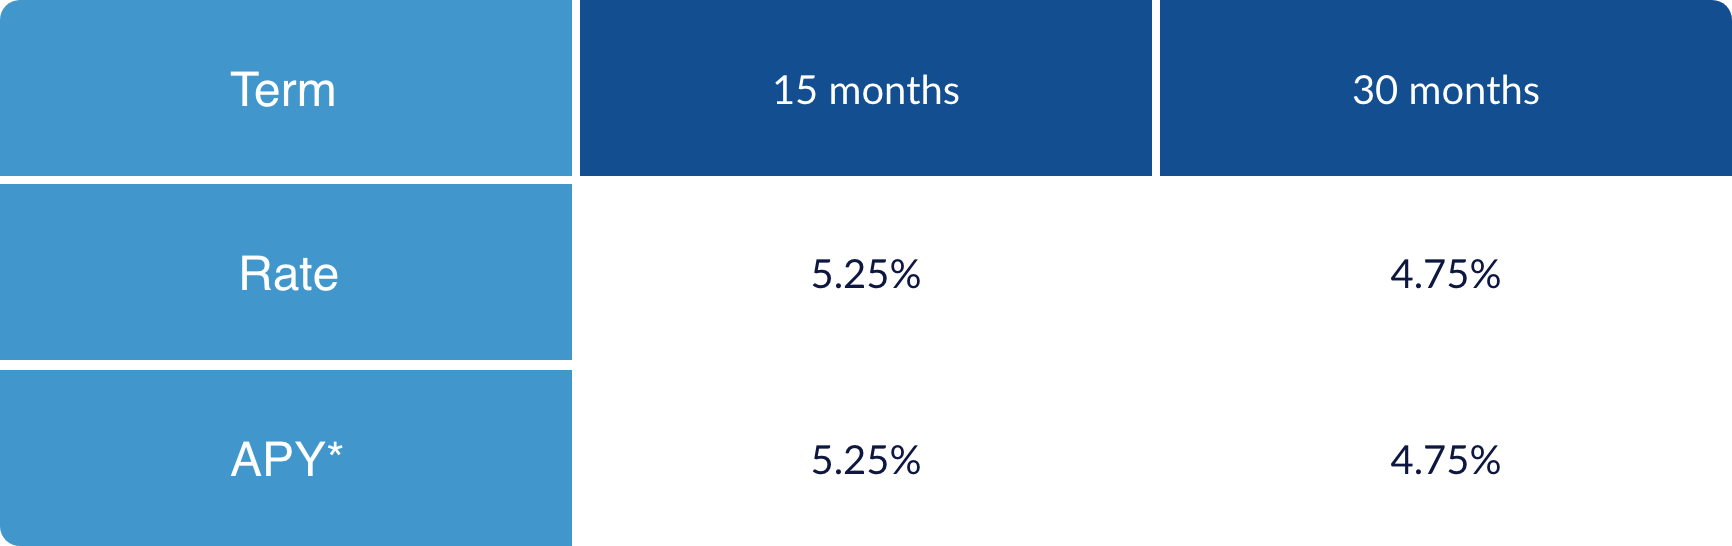 Term | 15 Months | 30 Months Rate | 5.25% | 5.75% APY* | 5.25% | 4.75%